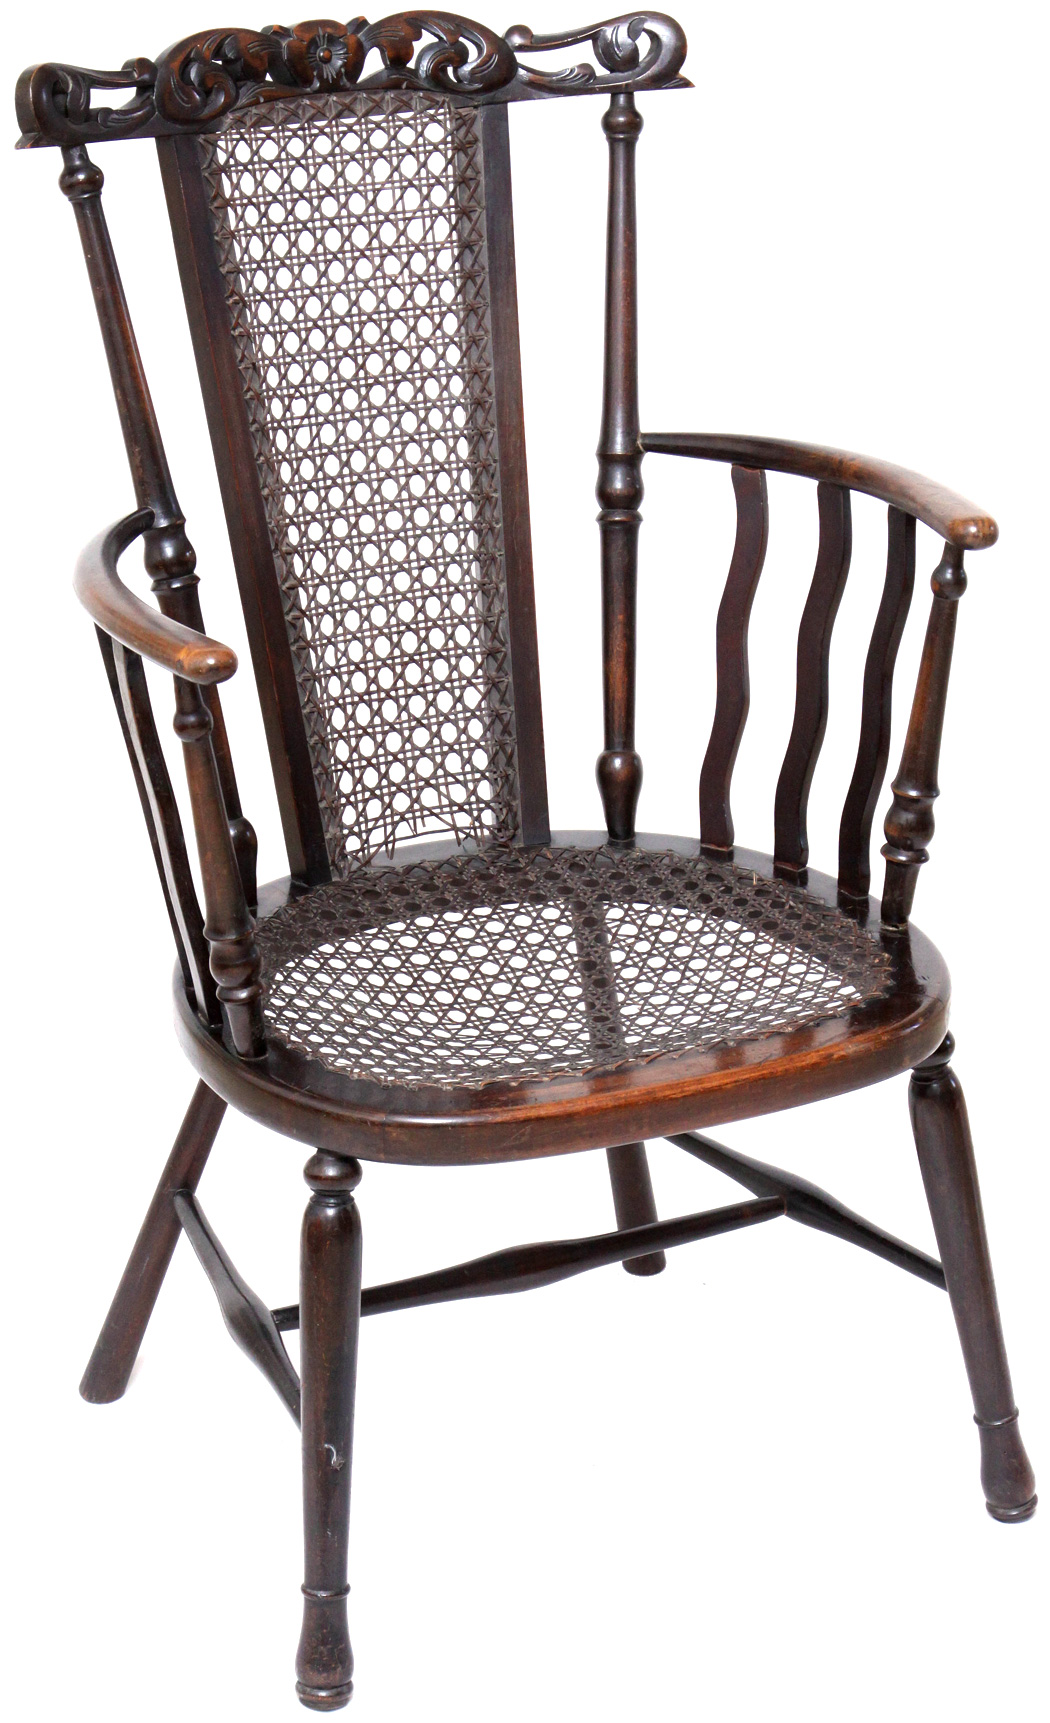 Rare Victorian Windsor Chair with Caned Seat and Back - כסא וינדסור ויקטוריאני עתיק - Back To List of Antique Furniture